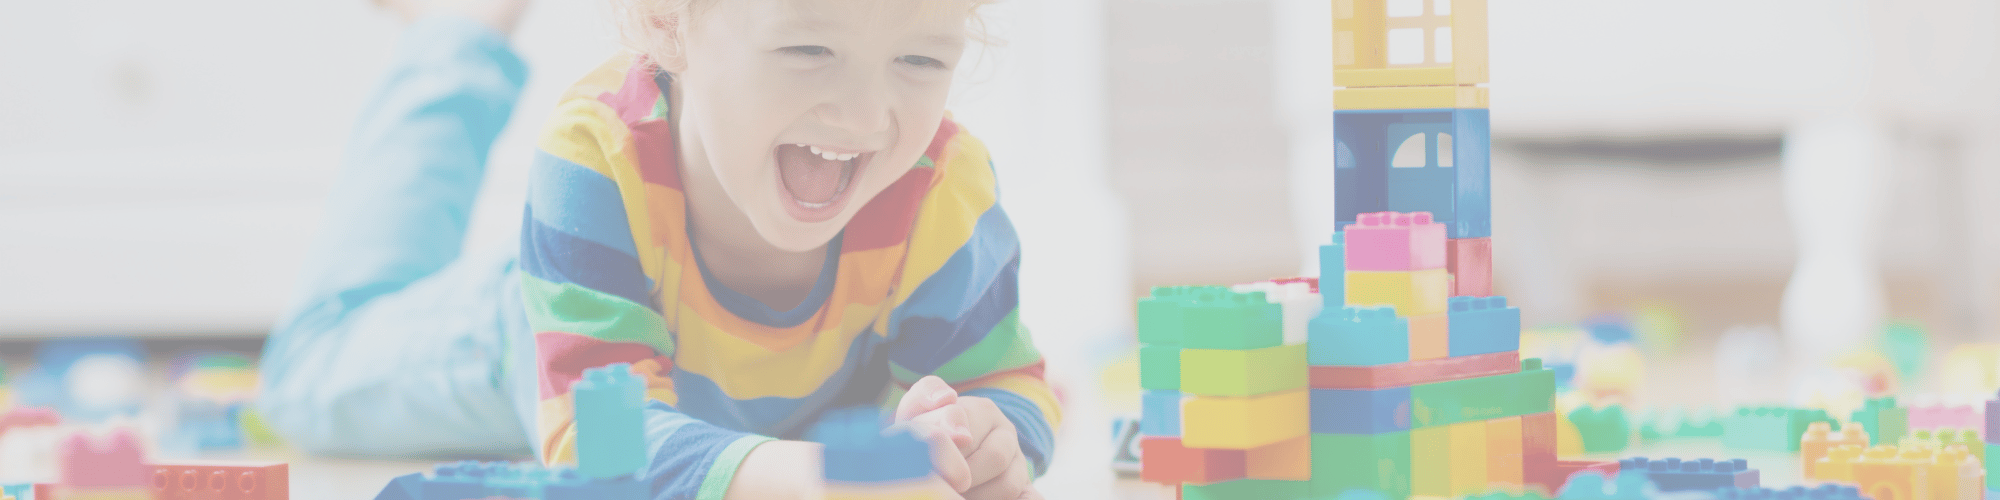 a smiling child plays with blocks on the floor